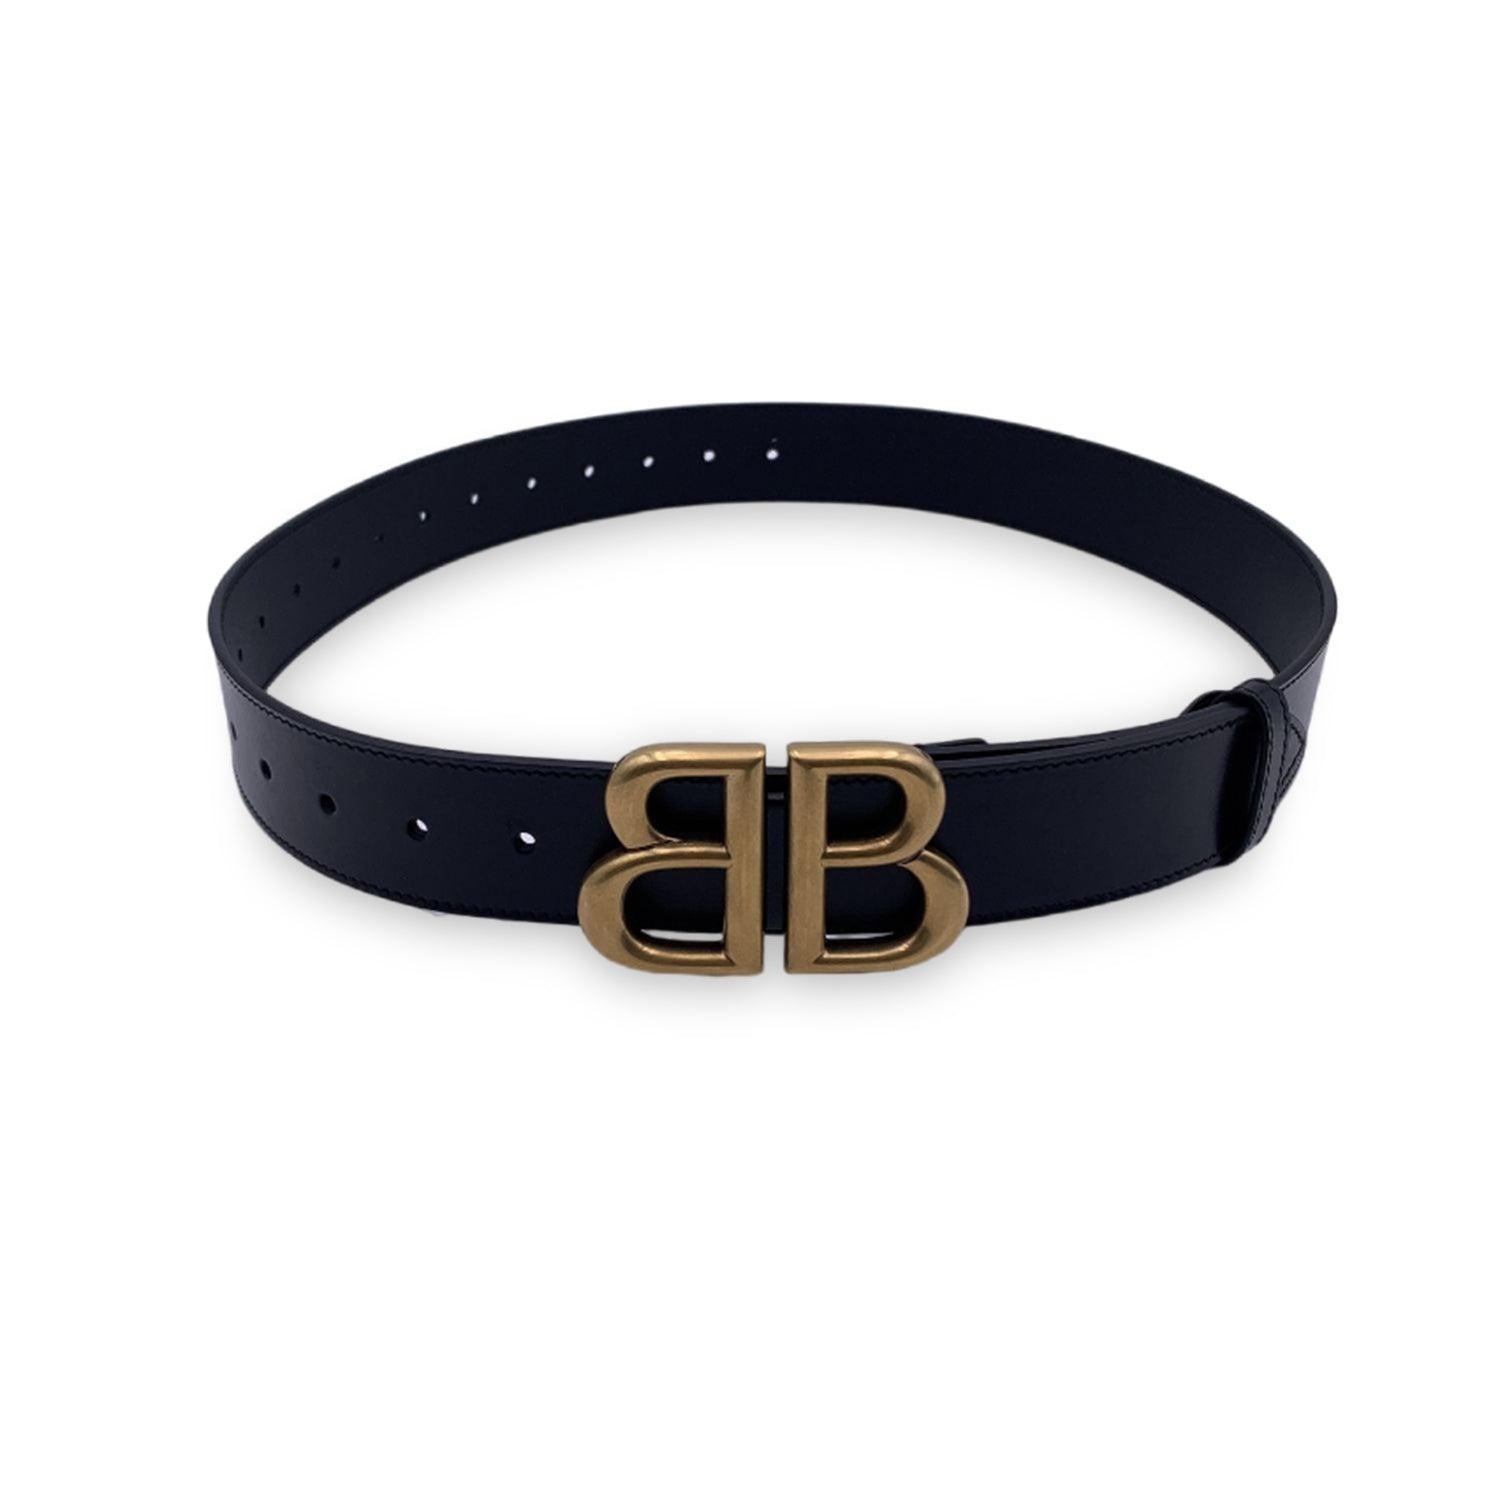 This beautiful belt will come with a Certificate of Authenticity provided by Entrupy. The certificate will be provided at no further cost GUCCI X BALENCIAGA BB black leather belt in black color. This iconic belt is created as part of the 'Hacker